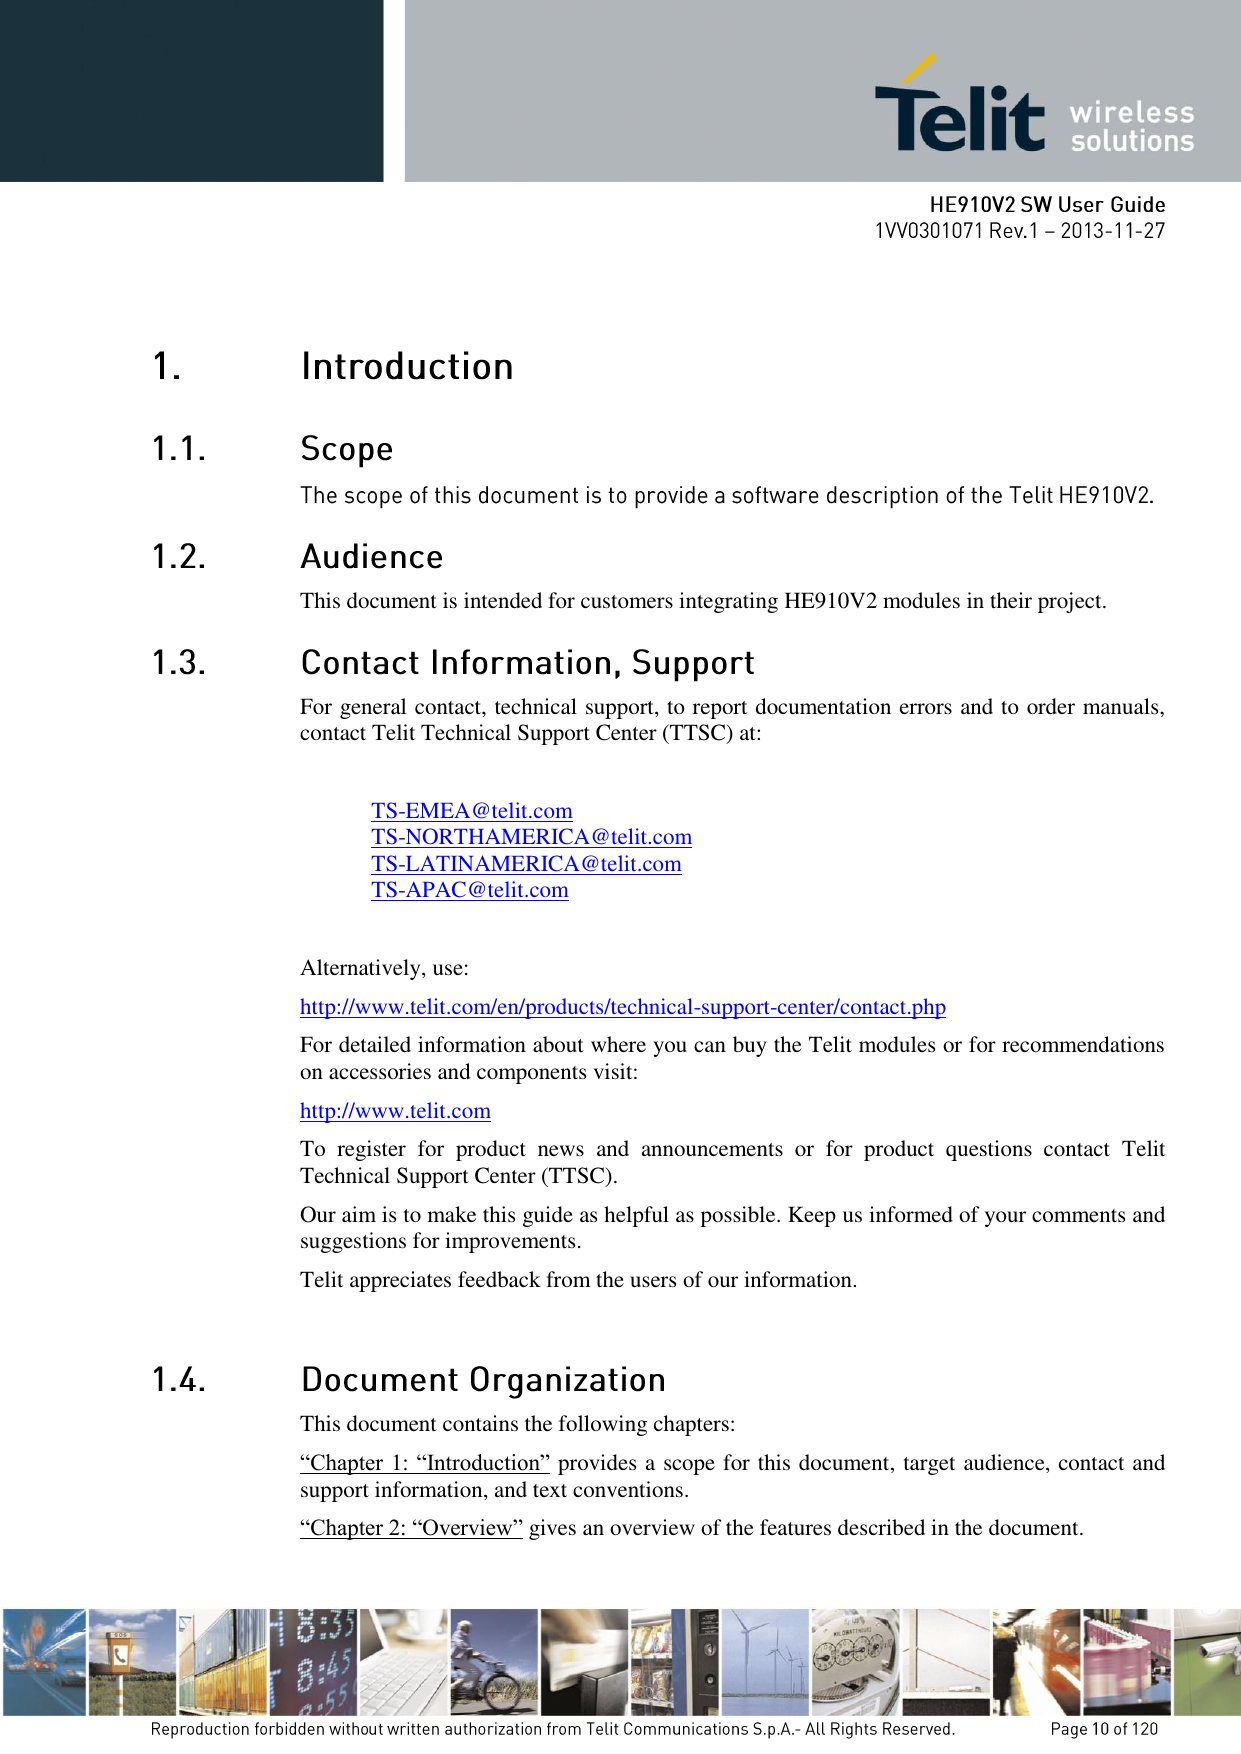    This document is intended for customers integrating HE910V2 modules in their project.  For general contact, technical support, to report documentation errors and to order manuals, contact Telit Technical Support Center (TTSC) at:  TS-EMEA@telit.com TS-NORTHAMERICA@telit.com TS-LATINAMERICA@telit.com TS-APAC@telit.com  Alternatively, use:  http://www.telit.com/en/products/technical-support-center/contact.php For detailed information about where you can buy the Telit modules or for recommendations on accessories and components visit:  http://www.telit.com To  register  for  product  news  and  announcements  or  for  product  questions  contact  Telit Technical Support Center (TTSC). Our aim is to make this guide as helpful as possible. Keep us informed of your comments and suggestions for improvements. Telit appreciates feedback from the users of our information.   This document contains the following chapters: “Chapter 1: “Introduction” provides a scope for this document, target audience, contact and support information, and text conventions. “Chapter 2: “Overview” gives an overview of the features described in the document. 